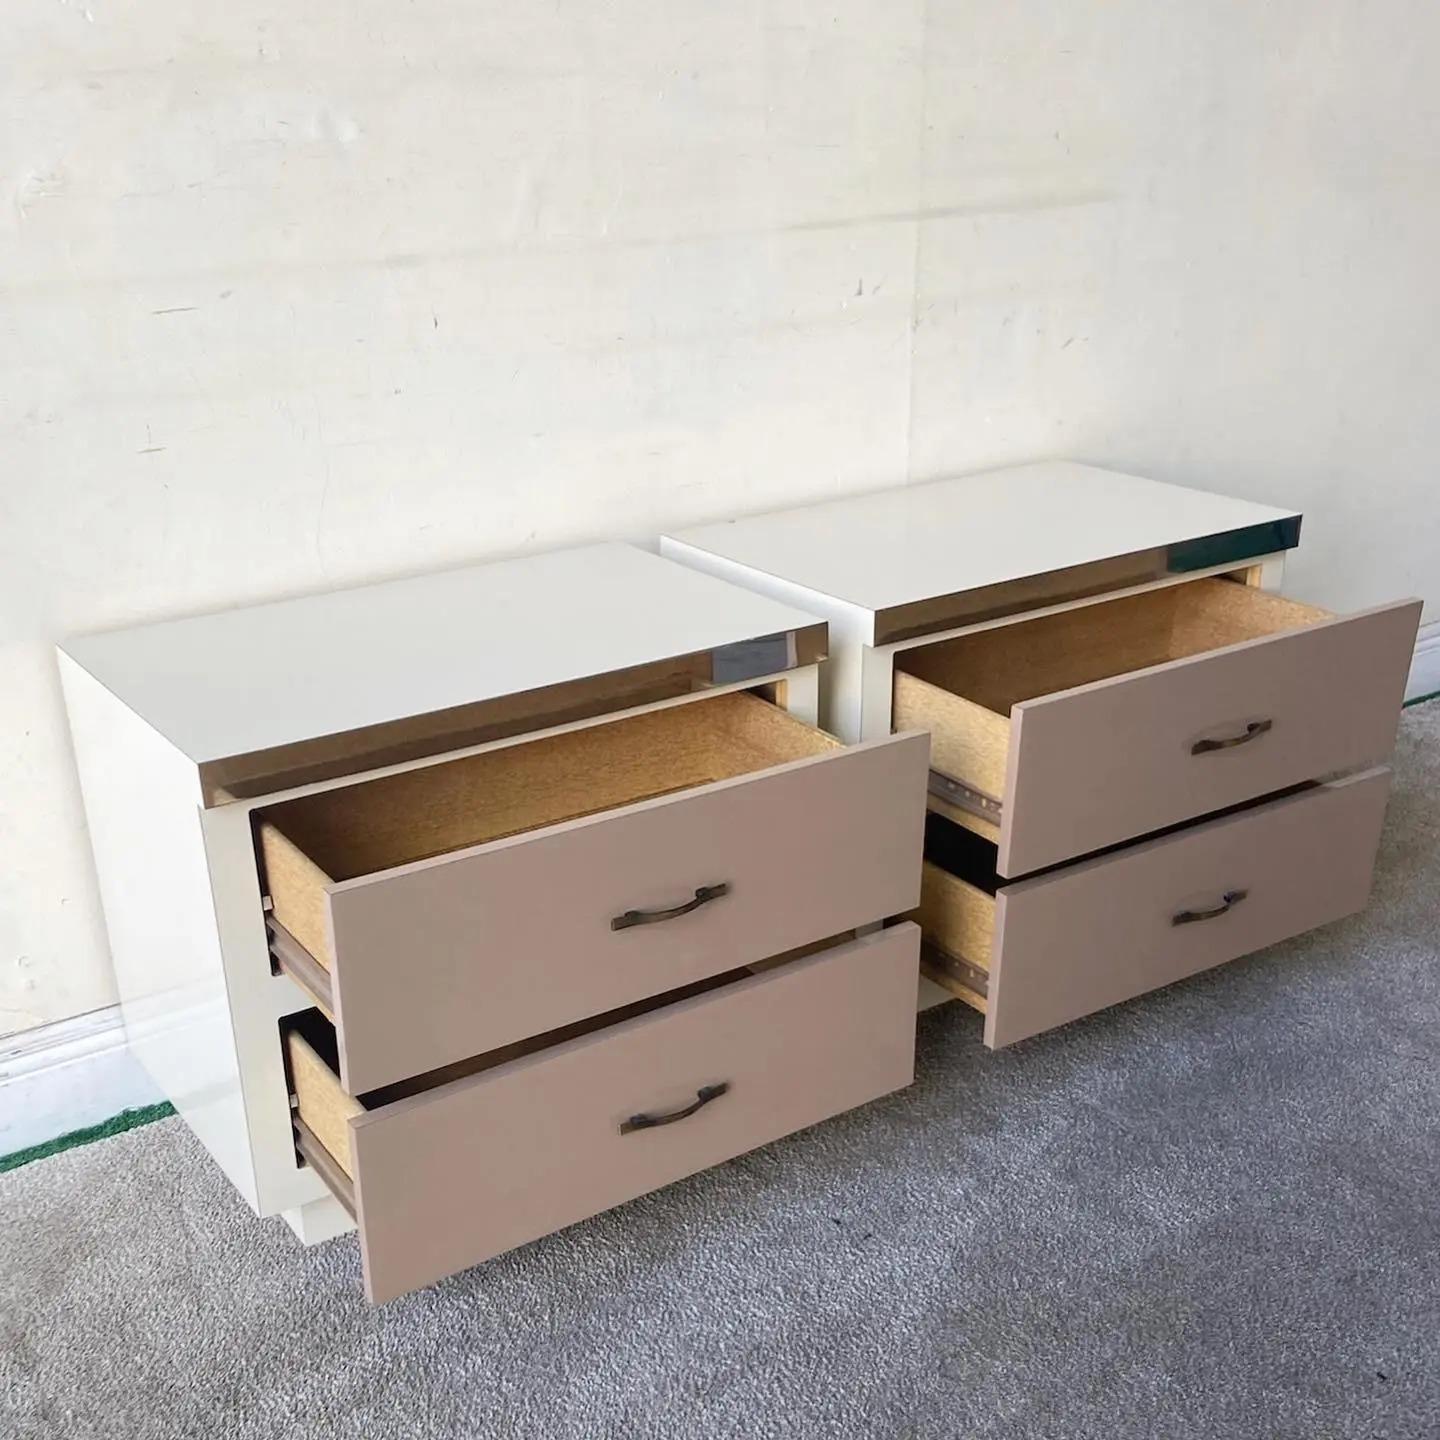 Exceptional pair of postmodern nighstands. Each feature a cream lacquer laminate with taupe lacquer laminate drawer faces with a chrome panne at the top.

Additional information:
Materials: Laminate, Wood
Color: Cream, Taupe
Style: Postmodern
Time